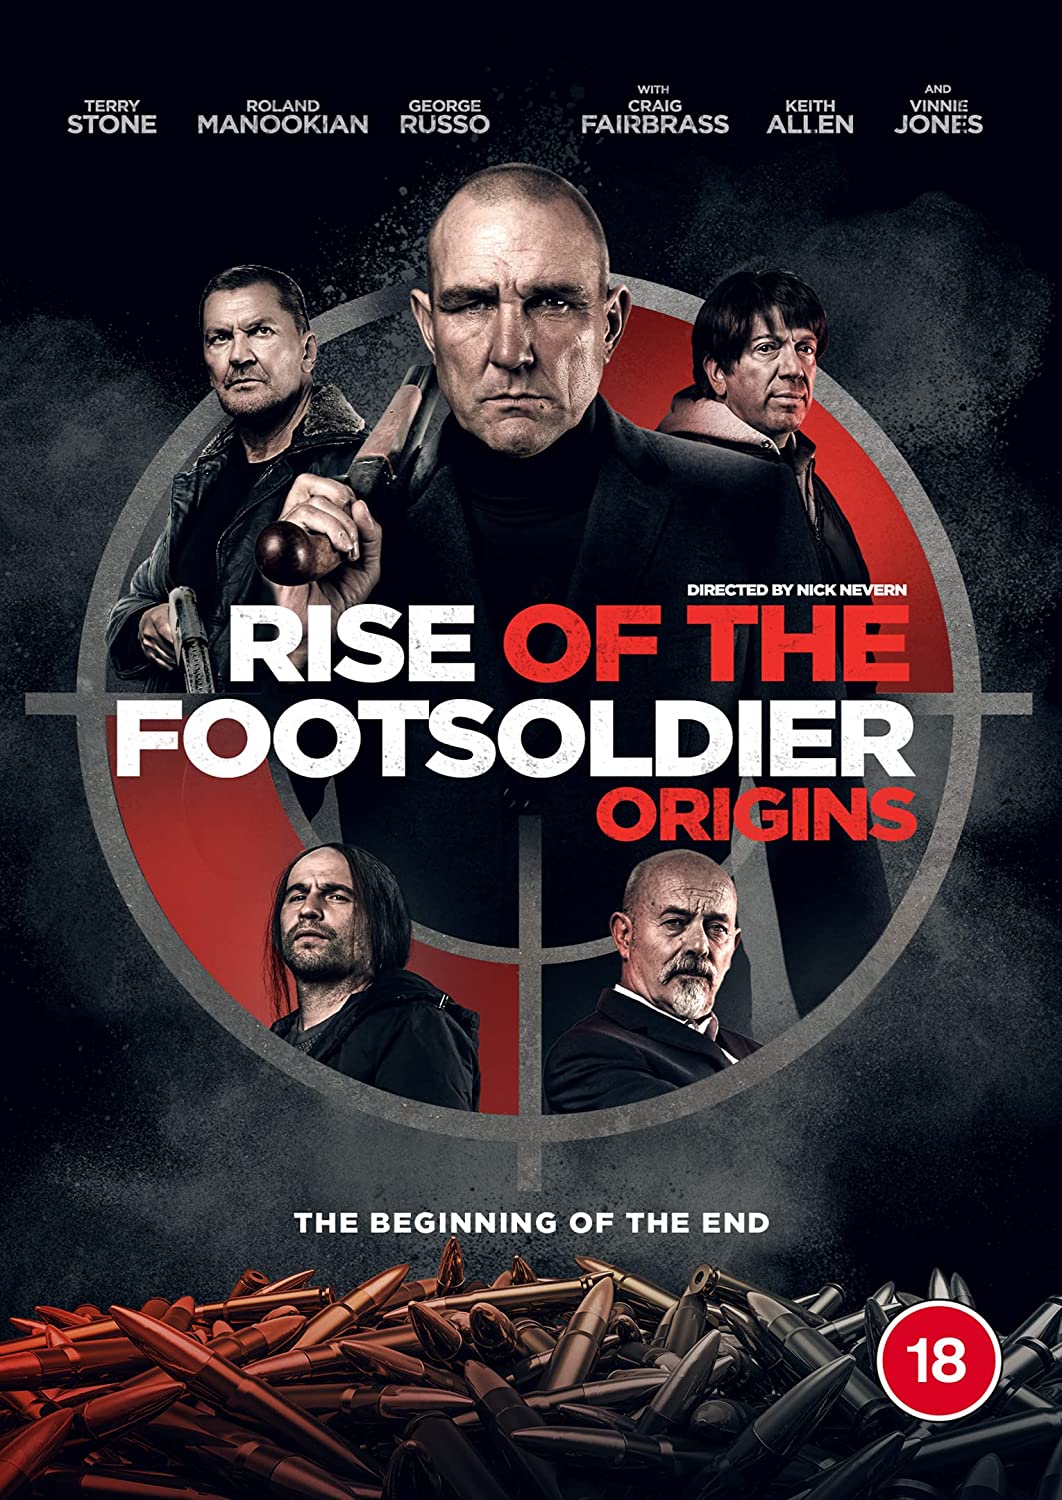 Rise of the Footsoldier: Origins  [2021] - Crime/Drama  [DVD]